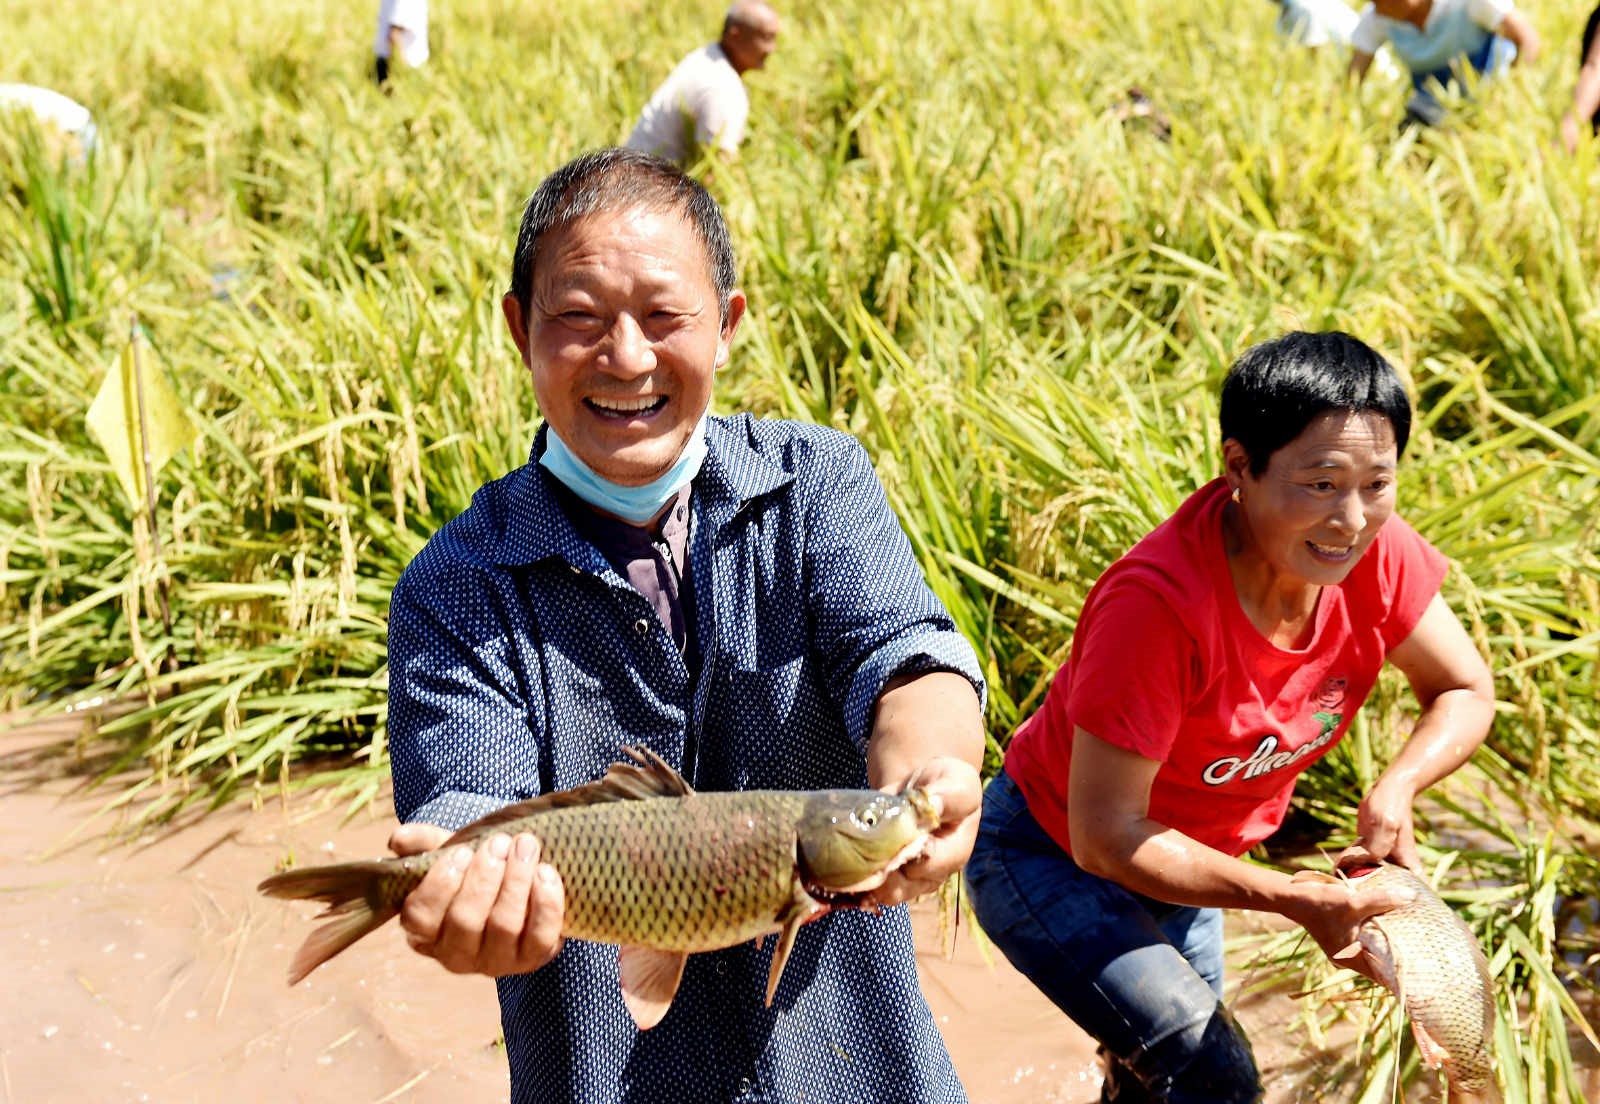 Chinese farmers celebrate harvest, embrace moderately prosperous society in all respects